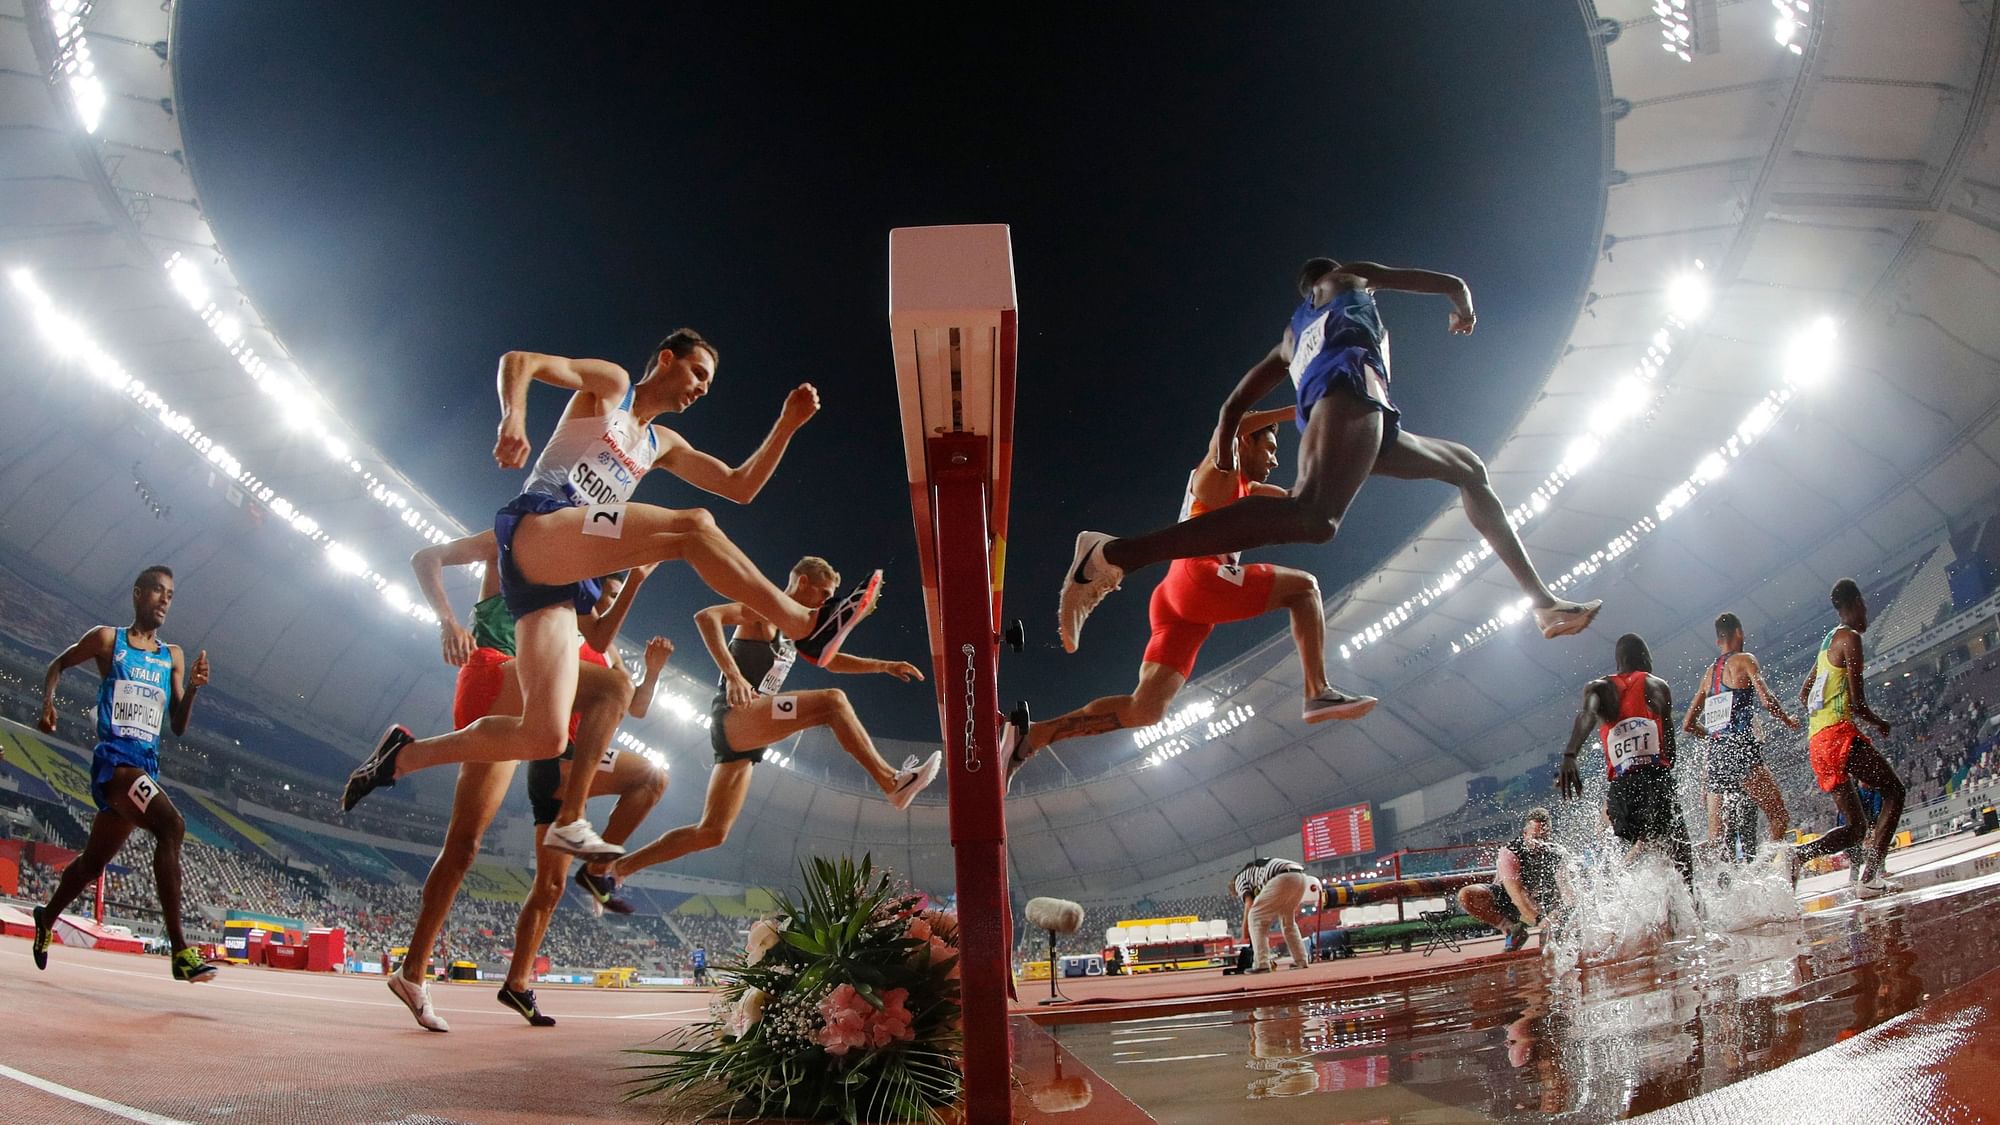 Runners compete in a men’s 3000 meter steeplechase heat at the World Athletics Championships in Doha, Qatar, Tuesday, Oct. 1, 2019.